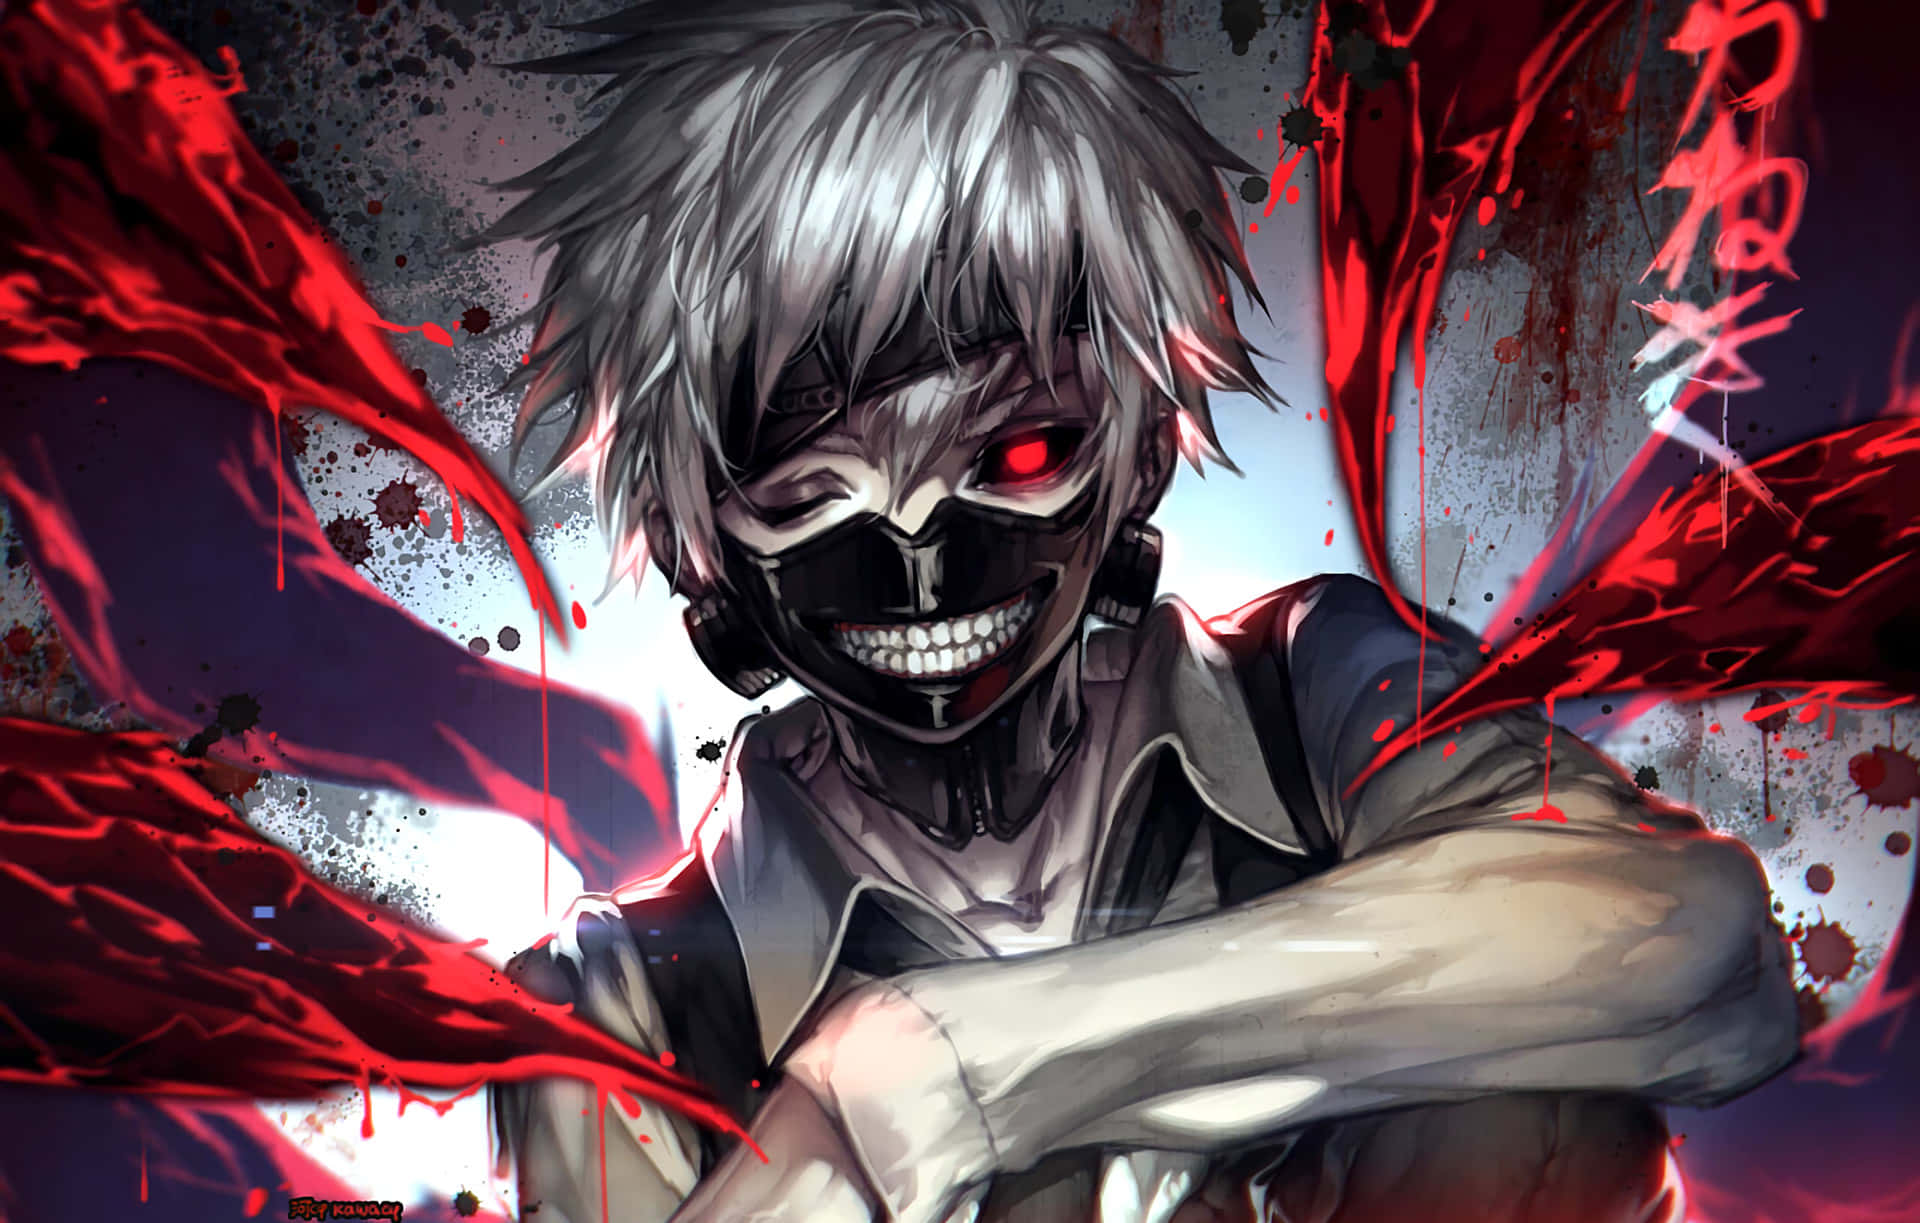 desiree outlaw add photo tokyo ghoul blonde guy